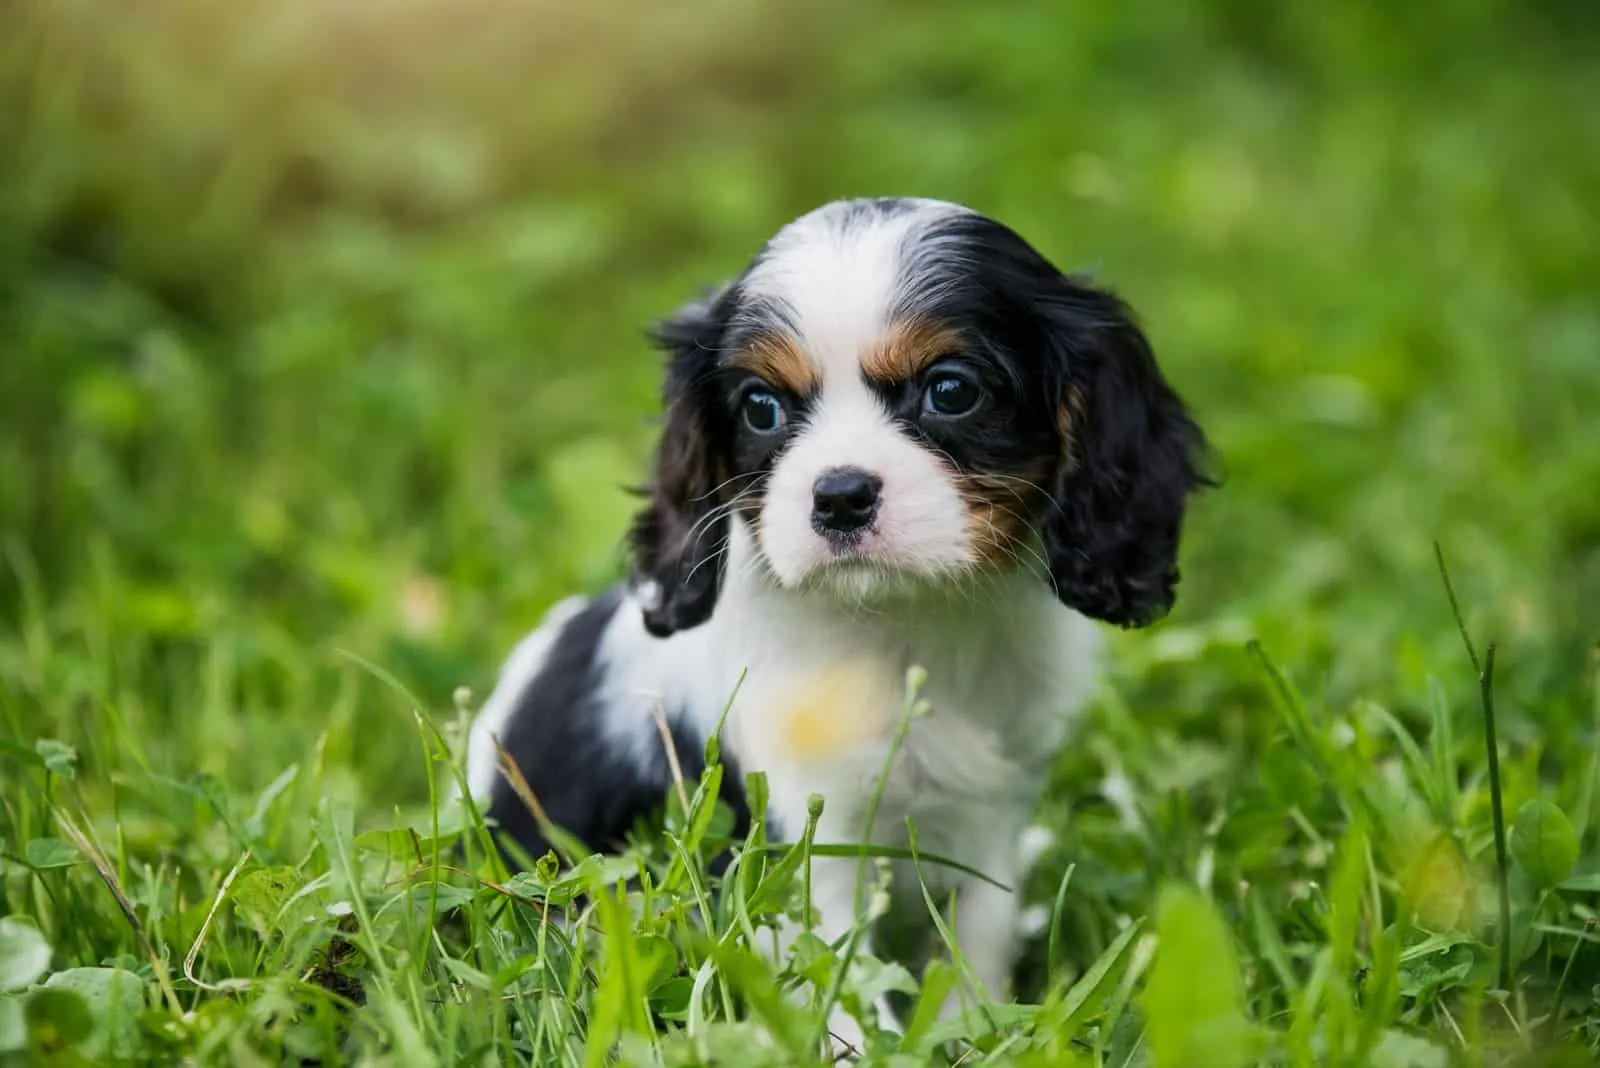 The Cavalier King Charles Spaniel puppies playing in the garden